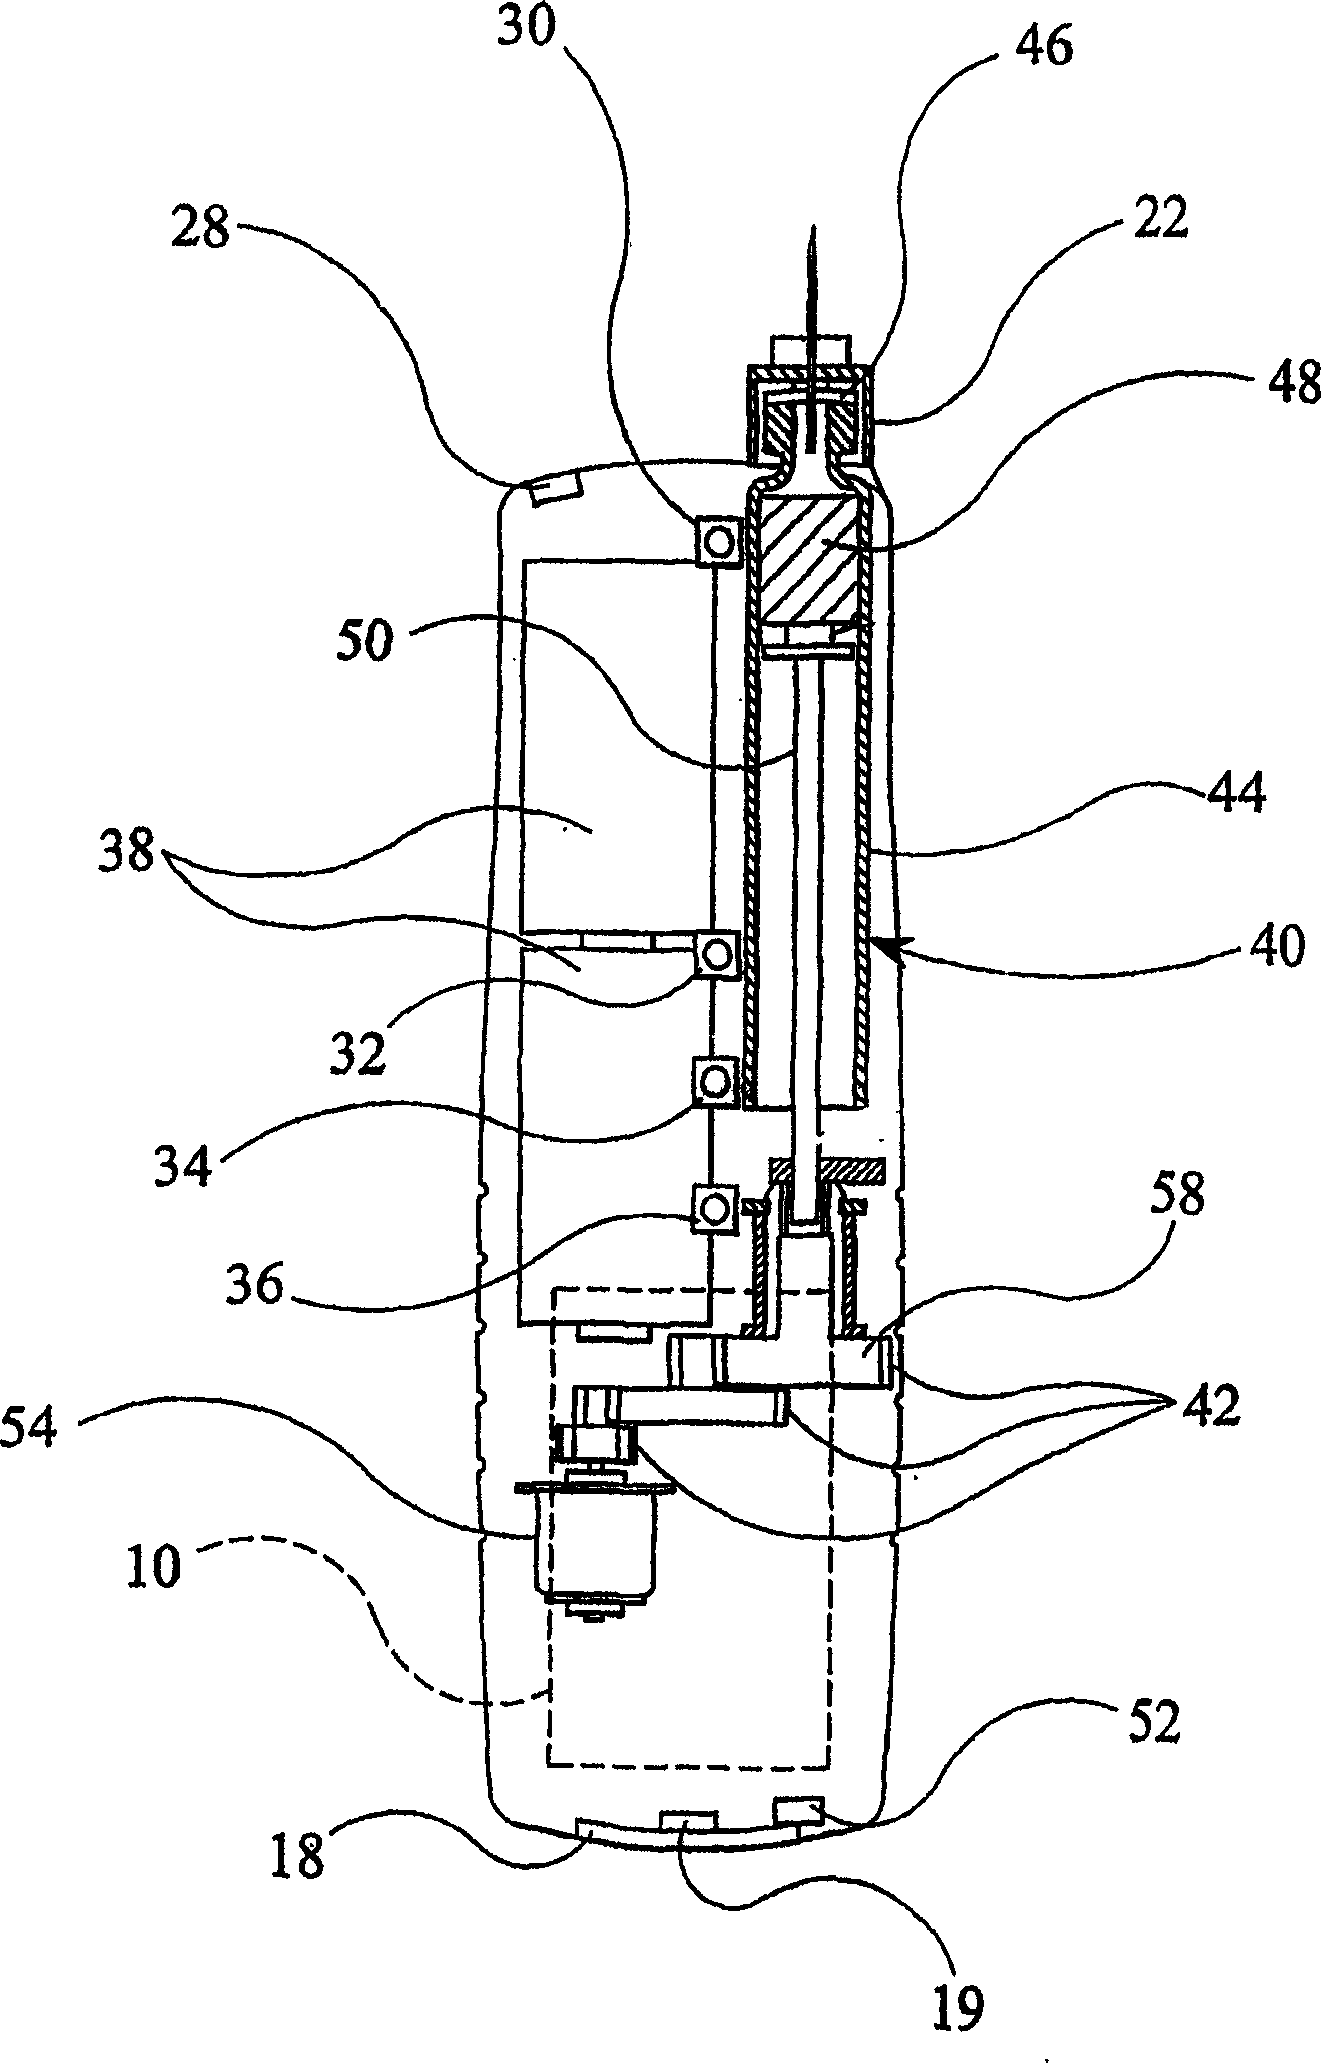 Drive mechanism for injection device